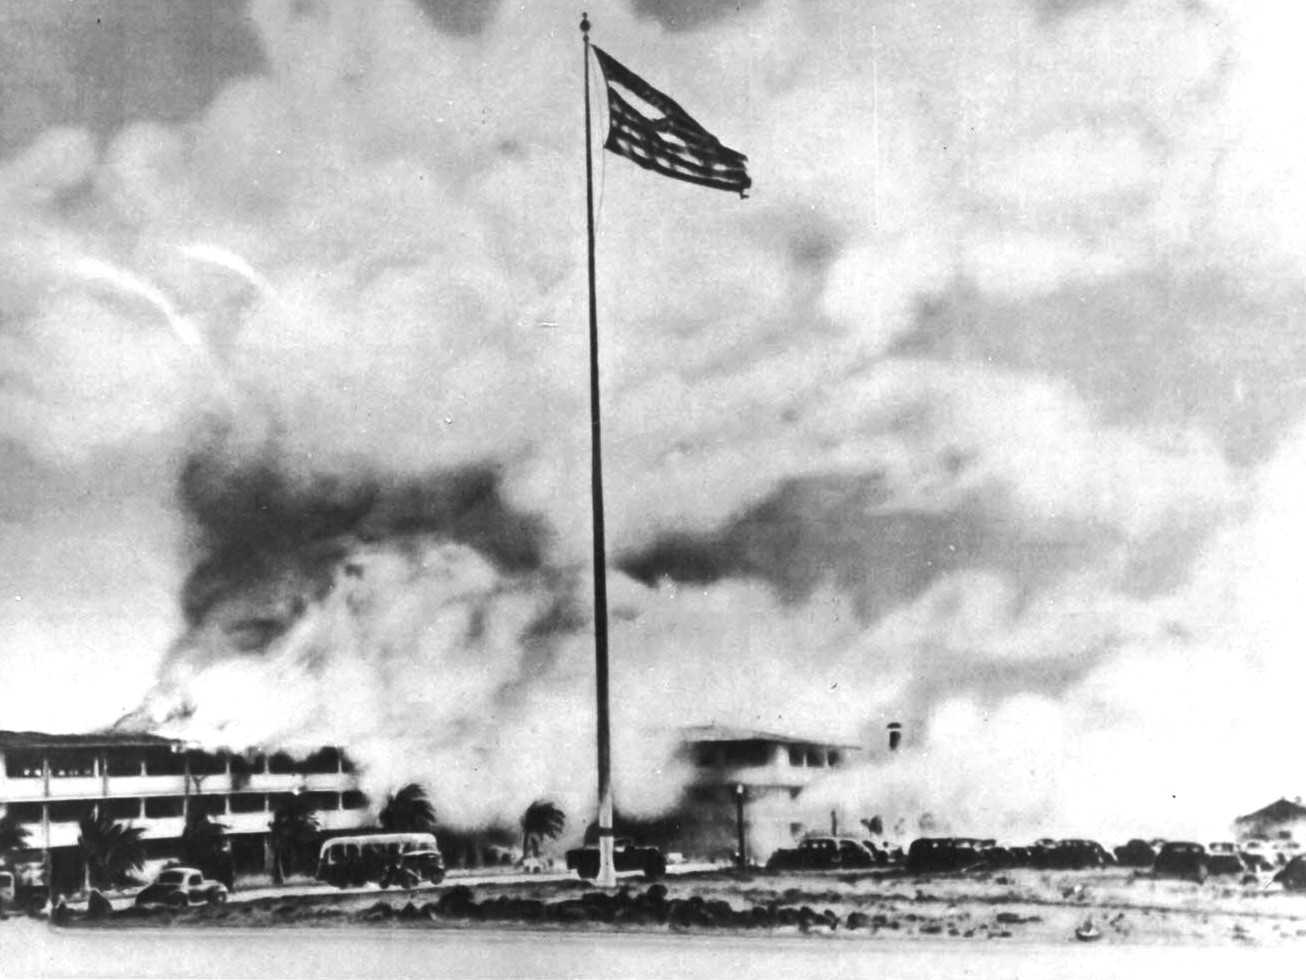 The American flag, battered and torn, flying at the Hickam Field barracks during the Pearl Harbor attack, Hawaii, 7 Dec 1941. This was one of the most published wartime flag photos until Joe Rosenthal’s Iwo Jima photo.